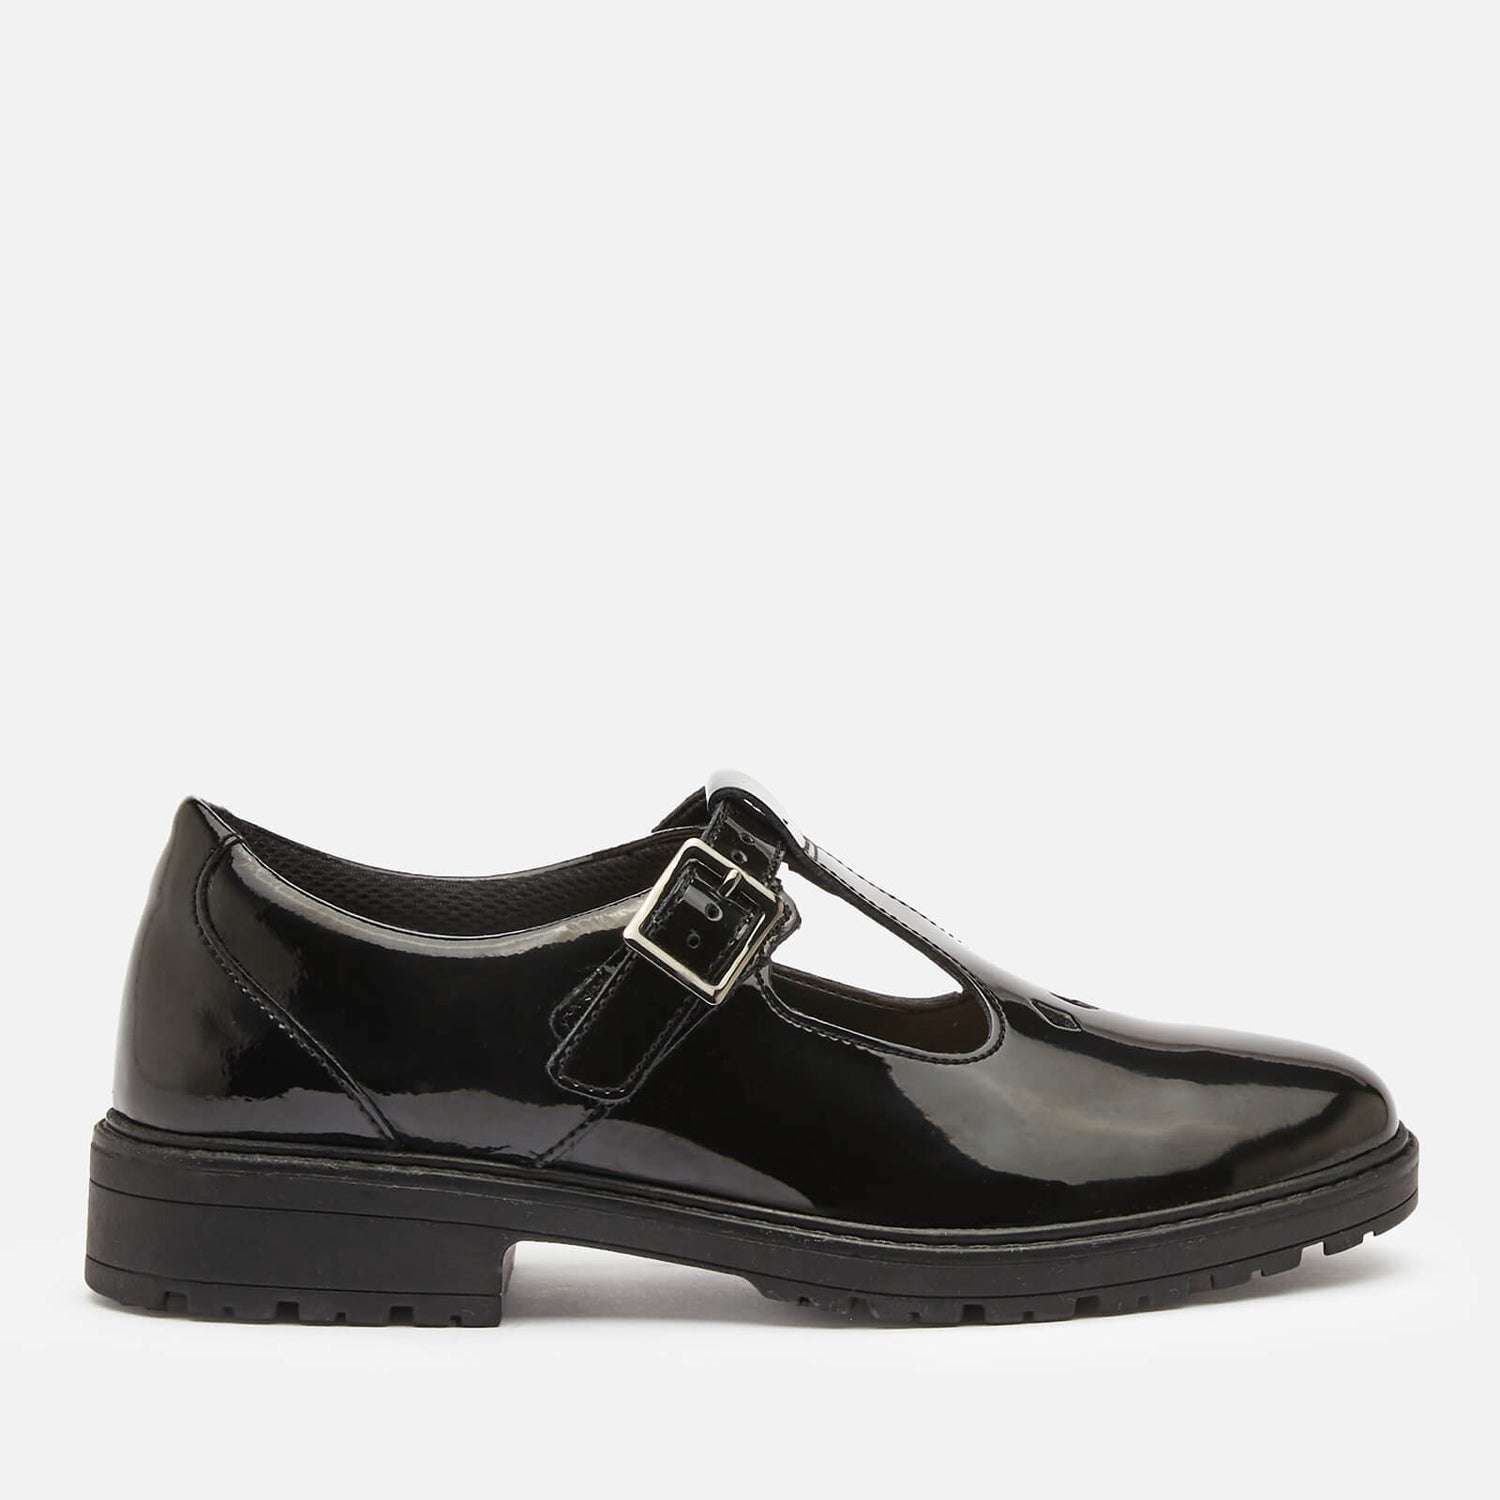 Clarks Dempster Bar Youth School Shoes - Black Patent